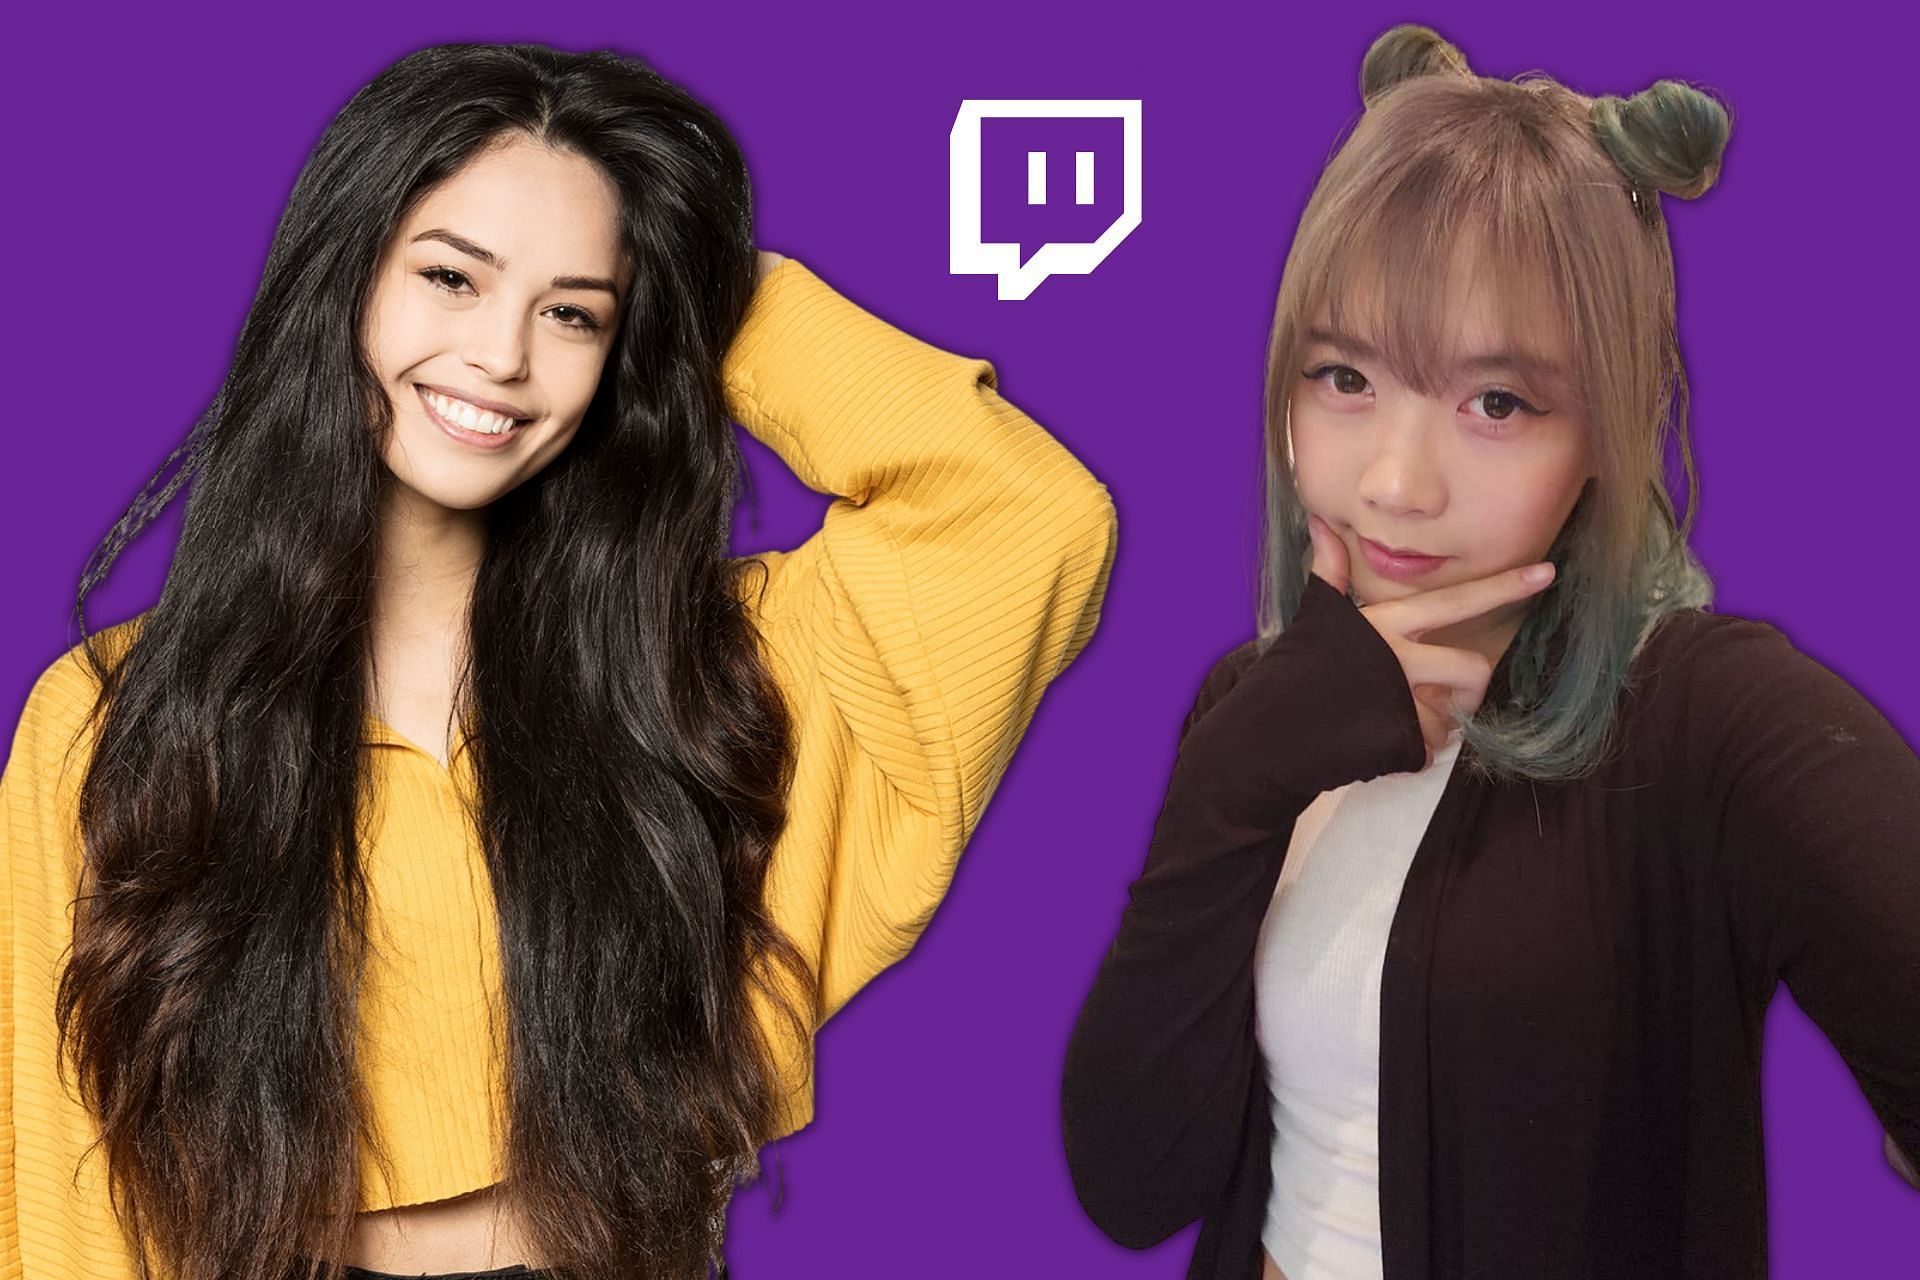 Lilypichu attempted to compliment Valkyrae in a recent stream, but it hilariously backfired (Image via Sportskeeda)